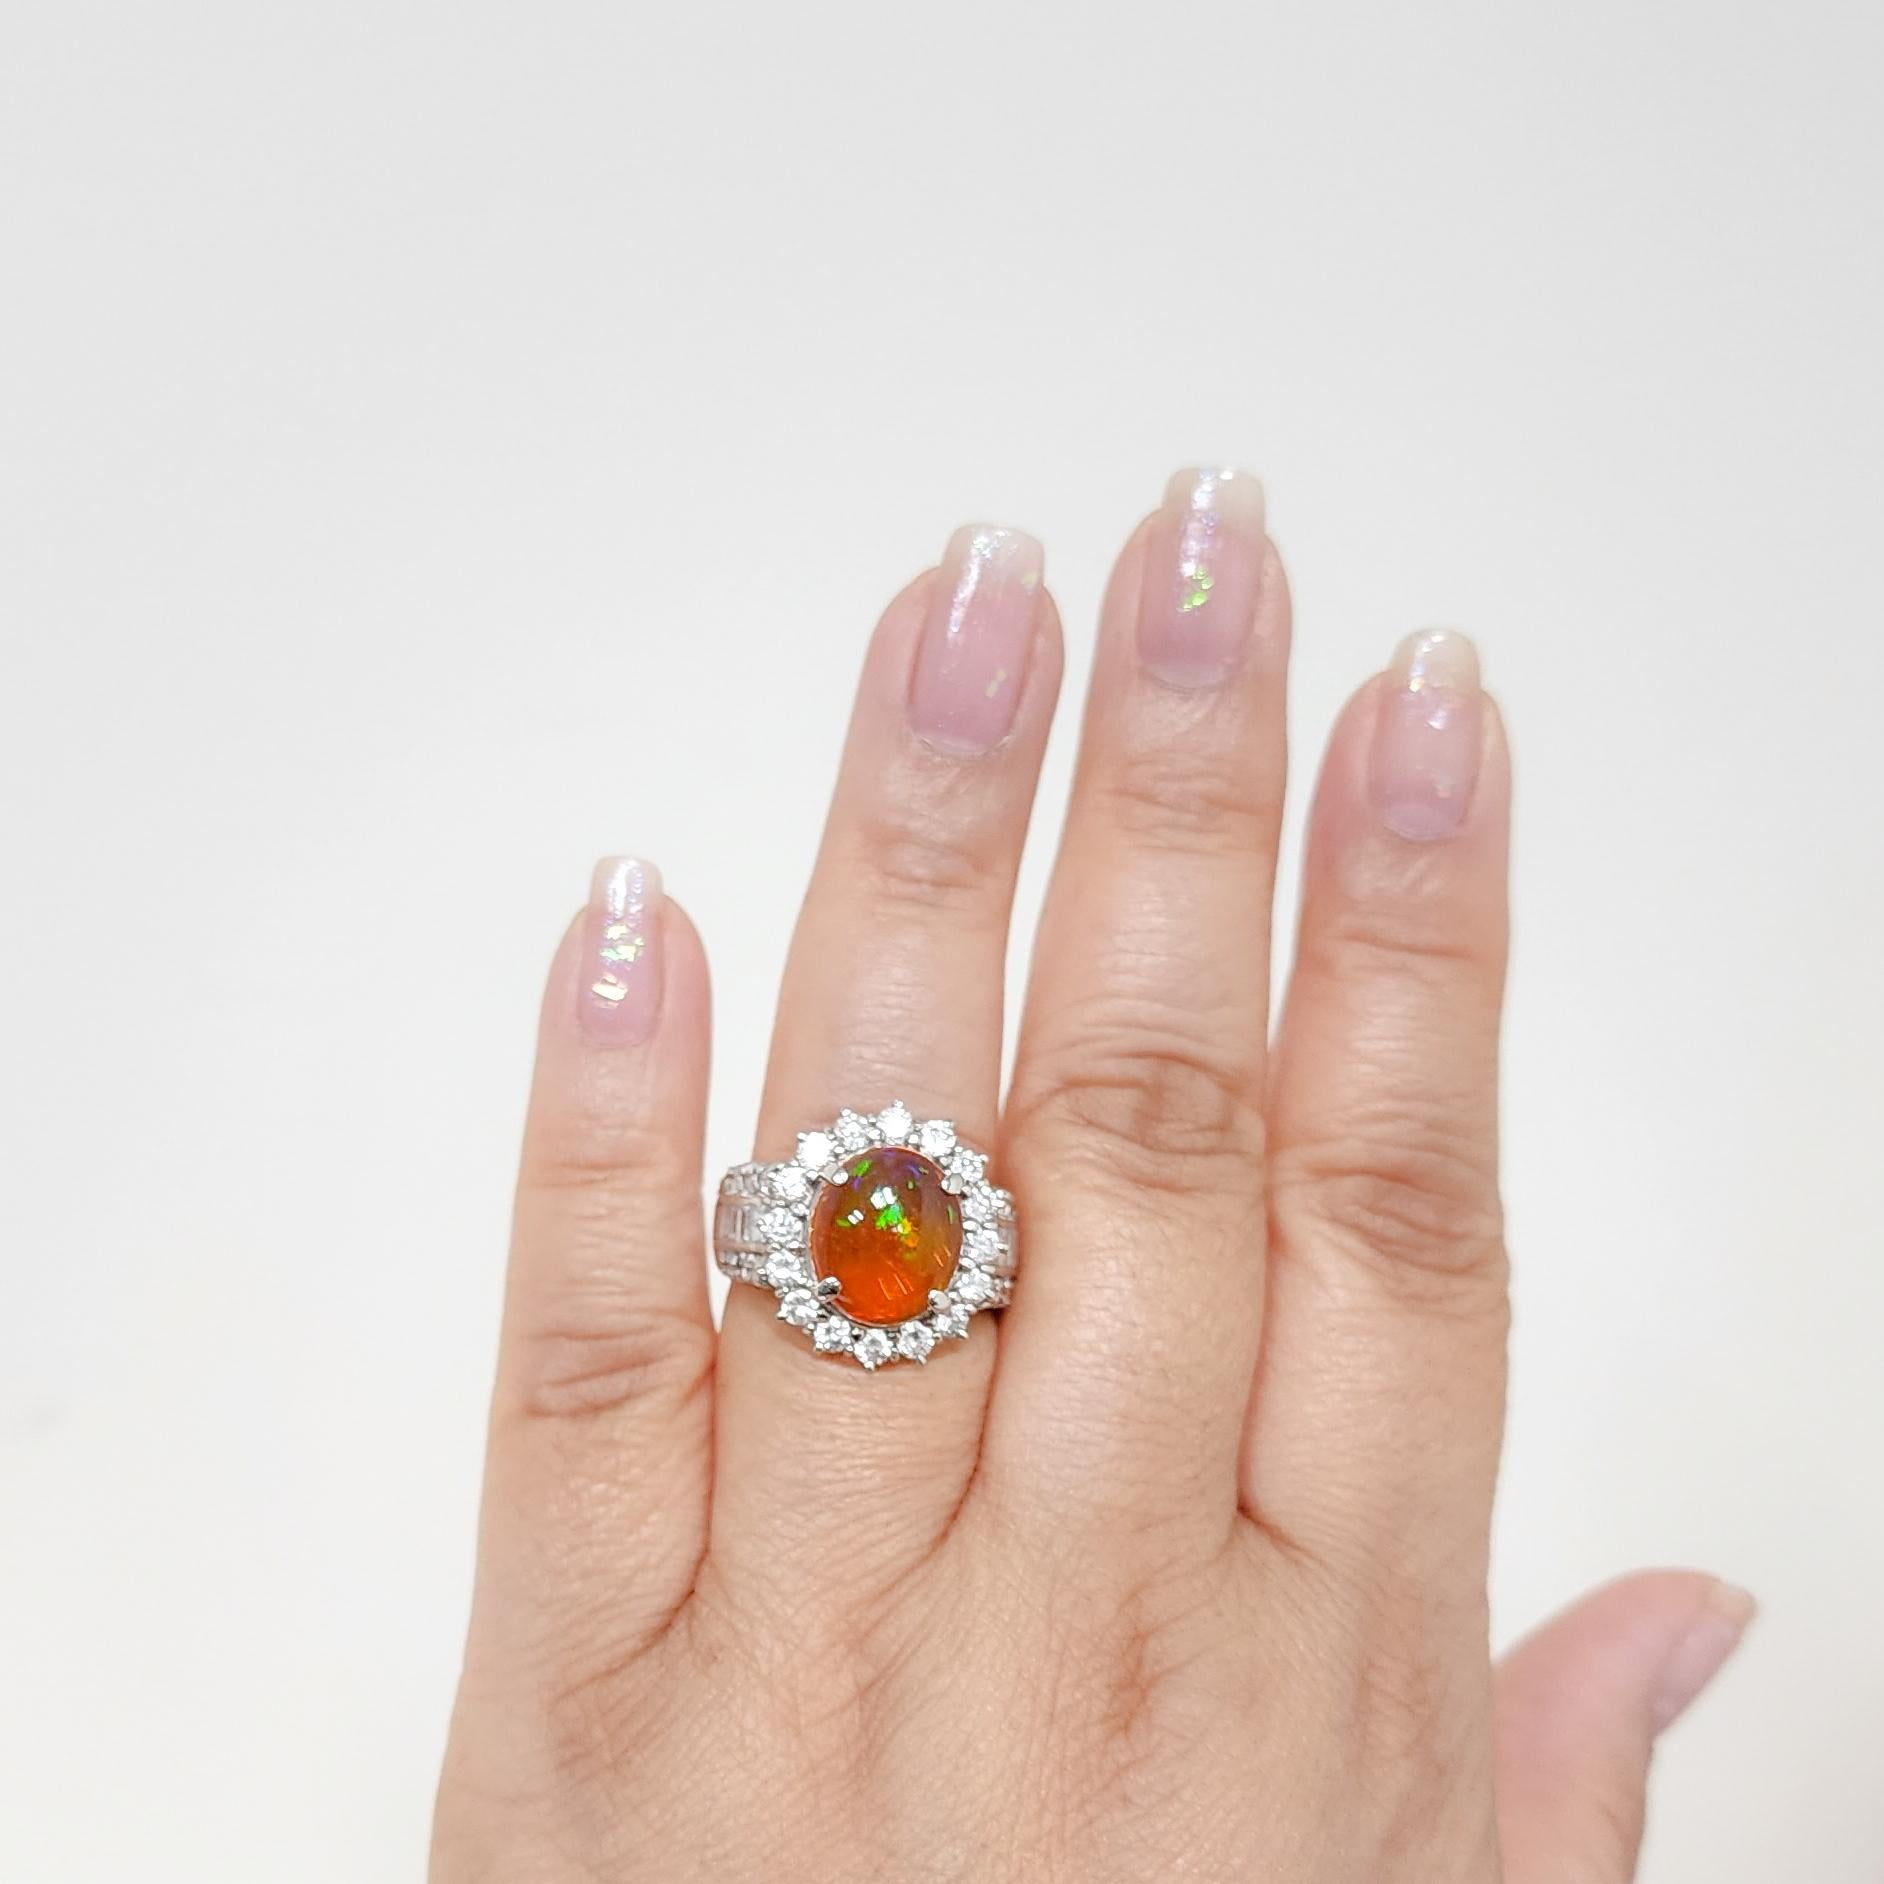 Gorgeous 4.27 ct. fire opal oval cabochon with 2.40 ct. white diamond rounds and baguettes.  Handmade in platinum.  Ring size 9.